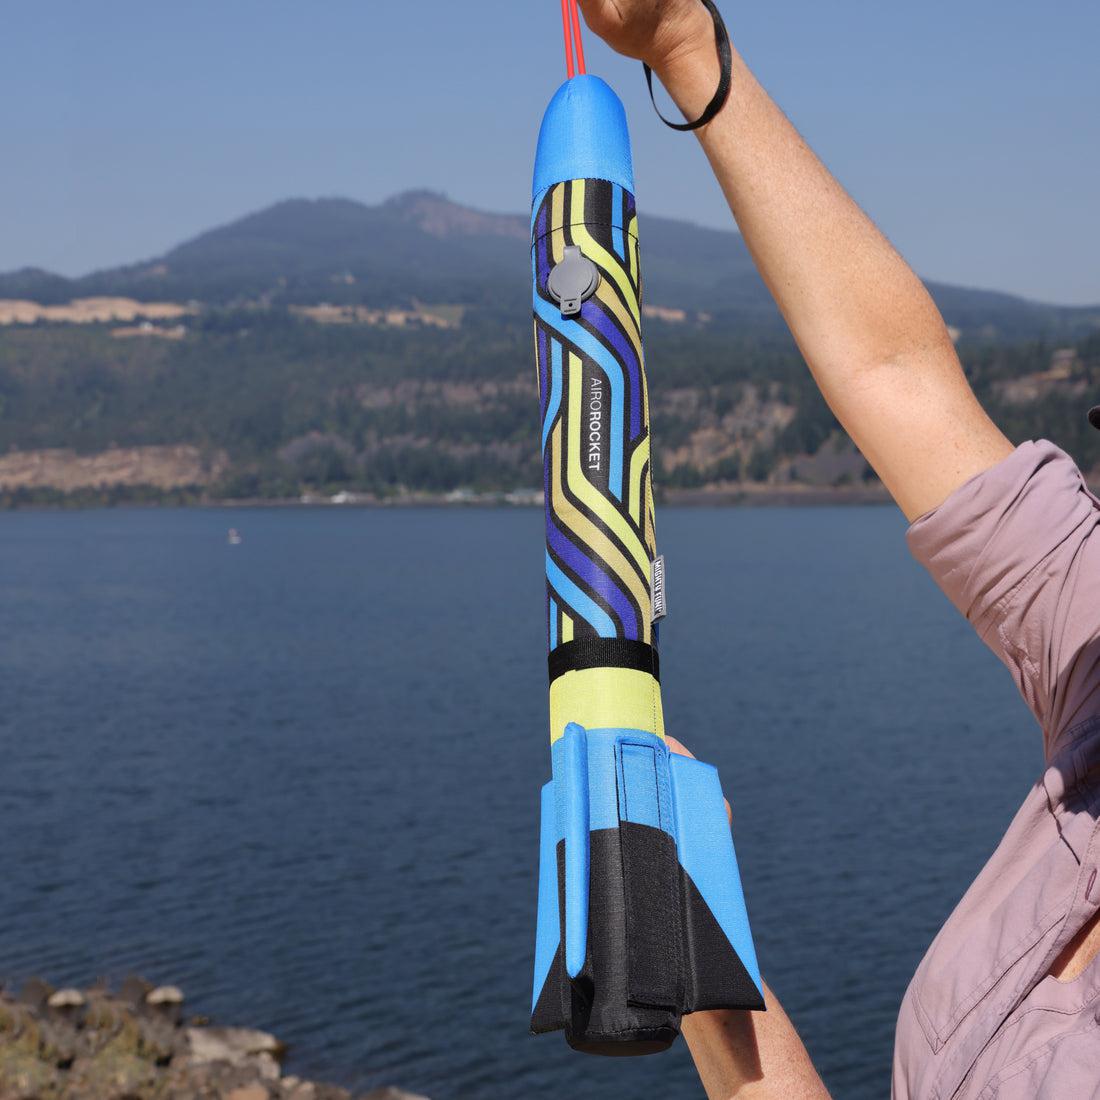 Front view of a person holding up inflated blue Airo Rocket.